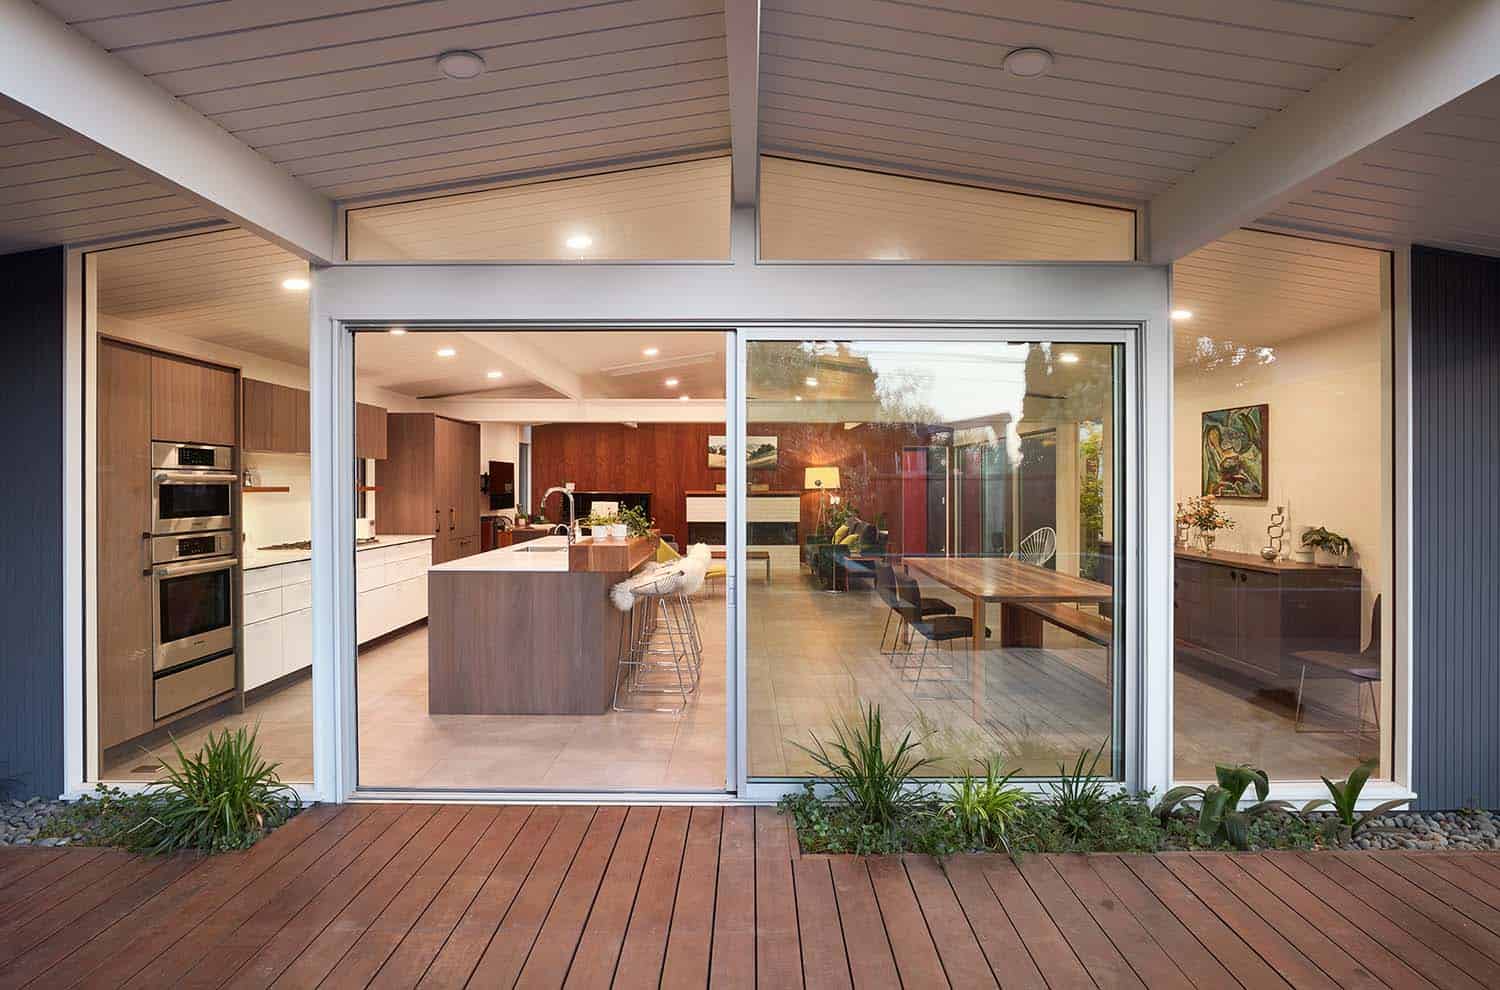 Eichler home exterior with sliding glass doors to the backyard patio